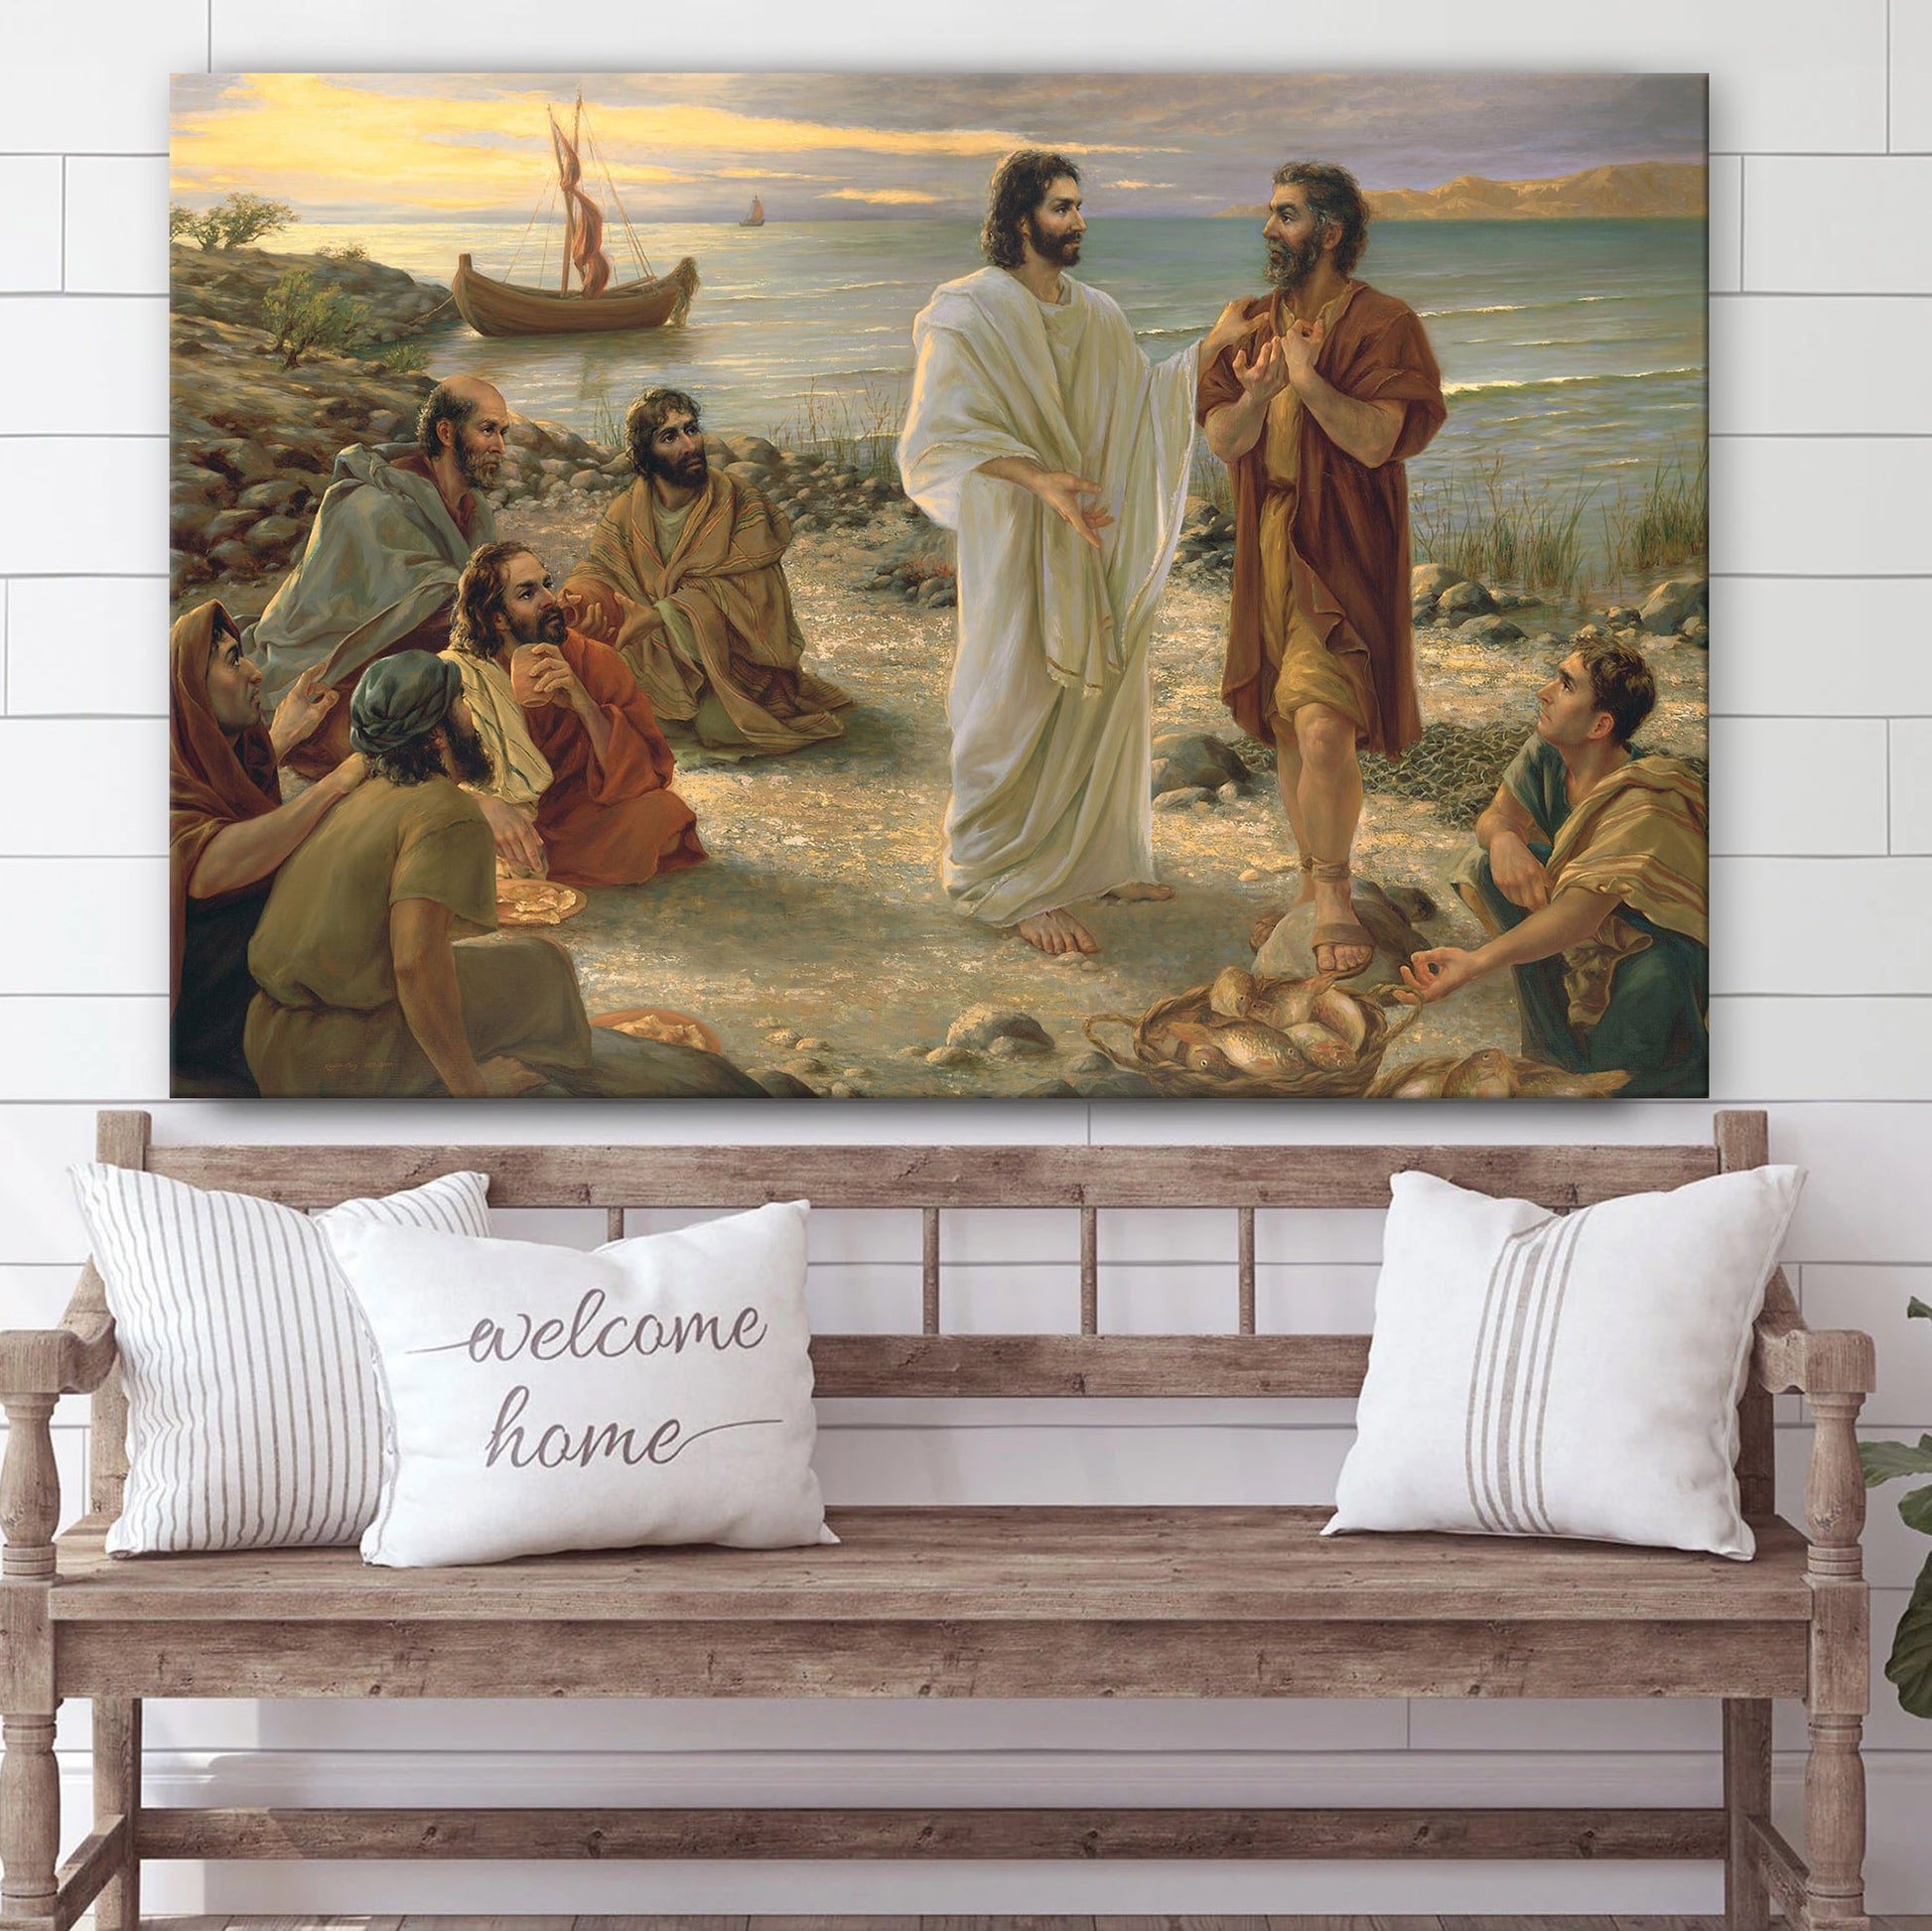 Feed My Sheep Canvas Wall Art - Christian Canvas Pictures - Religious Canvas Wall Art